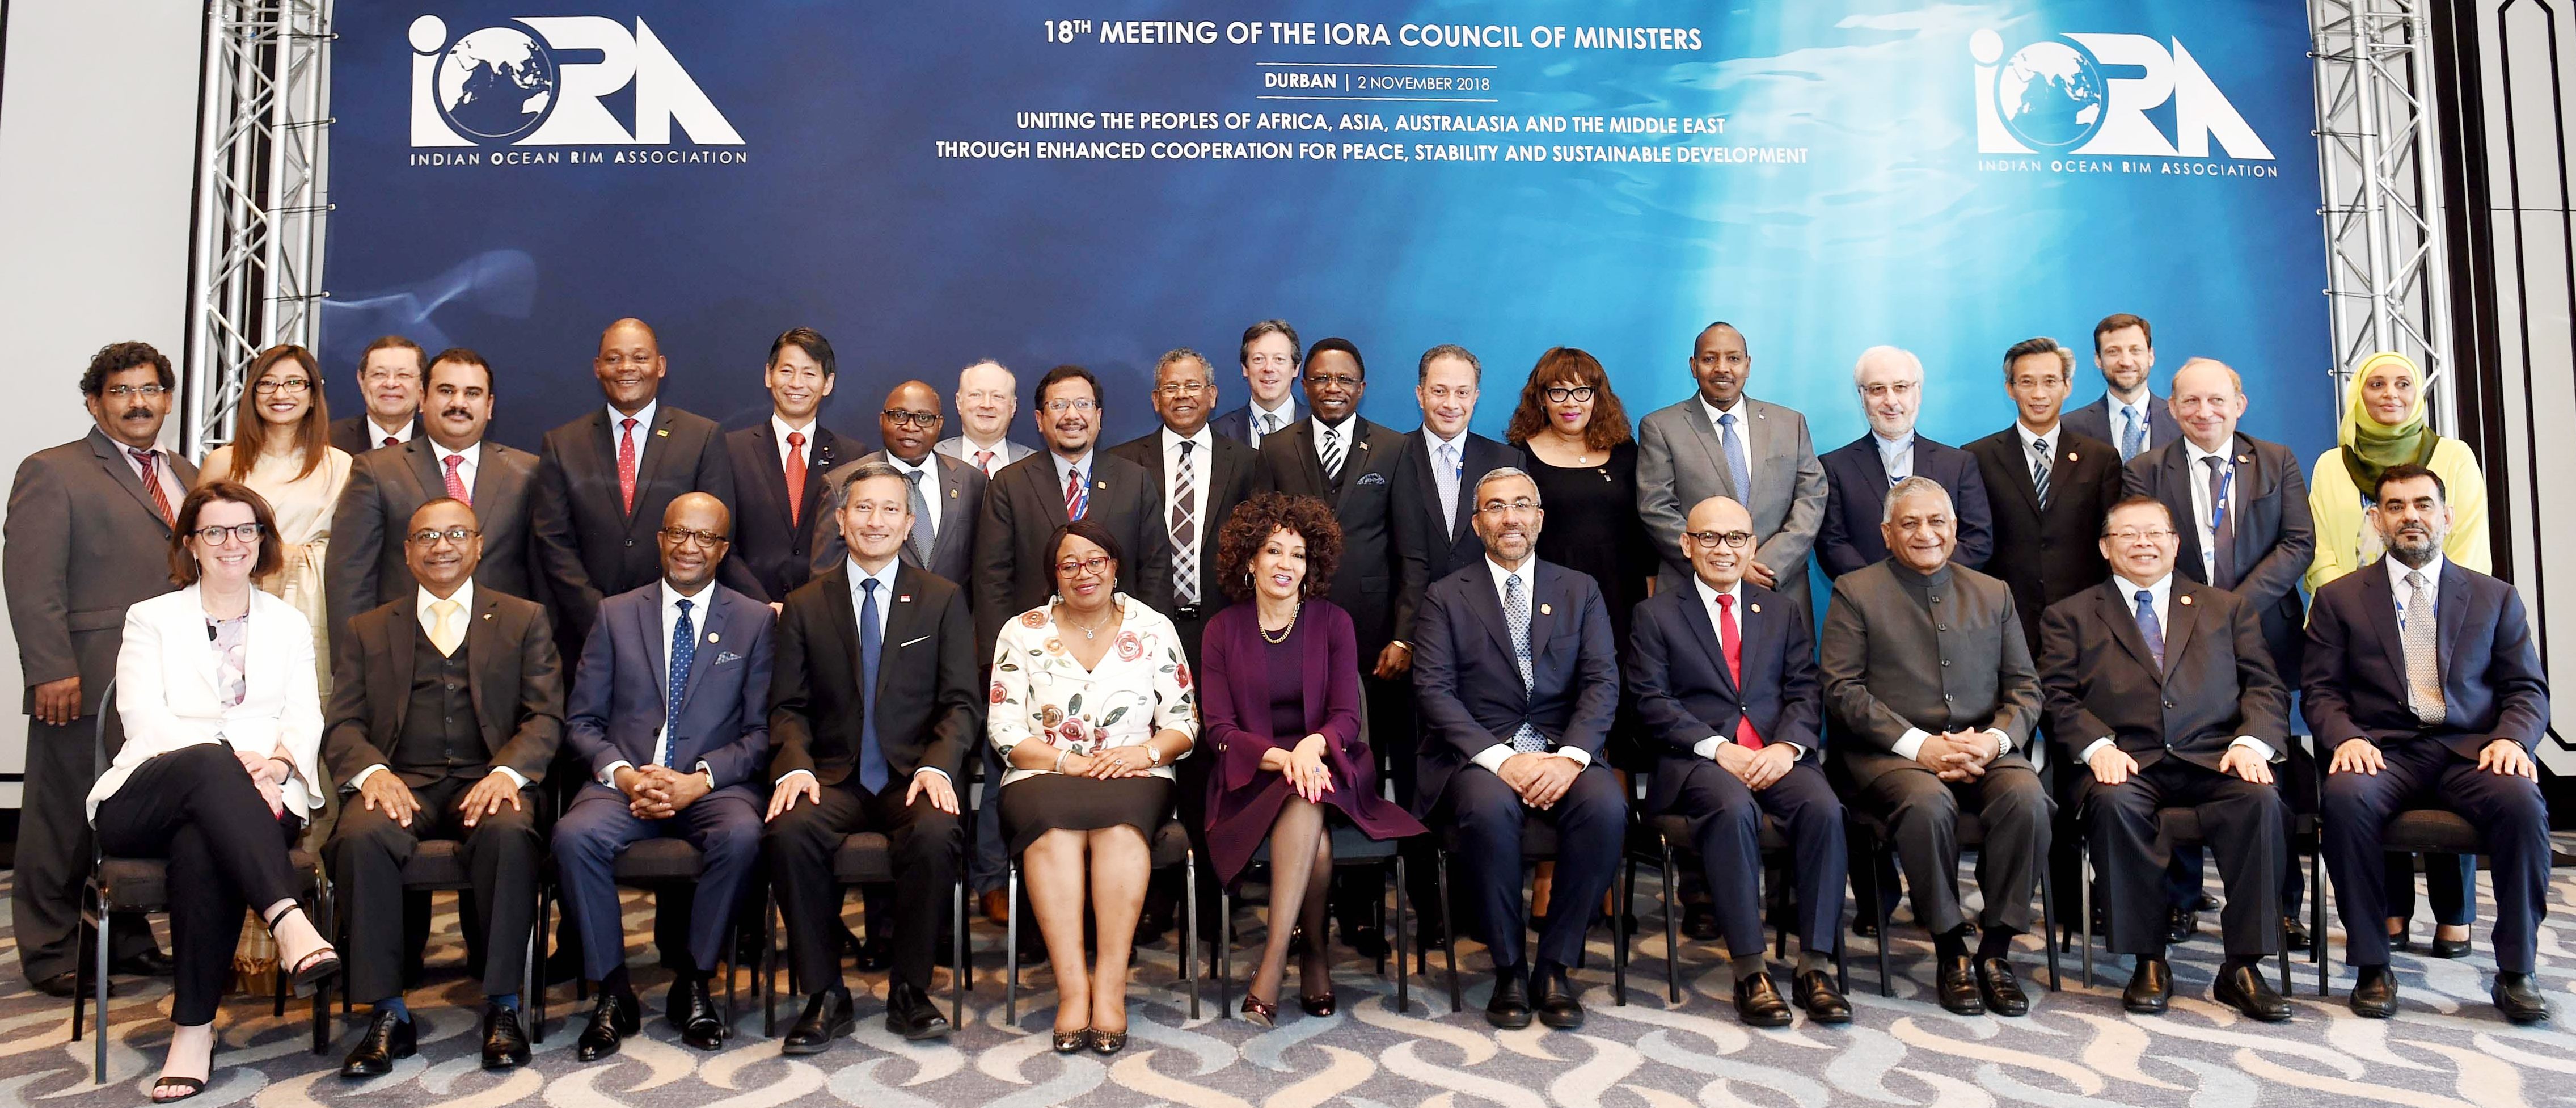 Minister of International Relations and Cooperation, Lindiwe Sisulu, opening the Council of Ministers Meeting of Indian Ocean Rim Association. Durban, KZN Picture byline: Jacoline Schoonees 2 November 2018 Media Advisory31 October 2018Minister Sisulu to host Council of Ministers Meeting of Indian Ocean Rim AssociationMinister of International Relations and Cooperation, Lindiwe Sisulu, will on Friday, 02 November 2018 host the 18th Indian Ocean Rim Association (IORA) Council of Ministers Meeting in Durban, KwaZulu-Natal Province.The meeting will take place under the theme: “IORA – Uniting the Peoples of Africa, Asia, Australasia and the Middle East through Enhanced Co-operation for Peace, Stability and Sustainable Development.”As the country celebrates the centenary of former president Nelson Mandela who is also viewed as the father of IORA, it is expected that the meeting will adopt a special declaration in honour of his legacy.IORA was established through the vision of former South African President Nelson Mandela, when 14 member states founded the Indian Ocean Rim Association for Regional Cooperation (IOR-ARC) in March 1997. Currently the membership of IORA is sitting at 21 member states. These countries include Australia, Bangladesh, Comoros, India, Indonesia, Iran, Kenya, Madagascar, Malaysia, Mauritius, Mozambique, Thailand, and United Arab Emirates.South Africa believes that IORA presents an opportunity to promote deeper economic co-operation among member states.Members of the media are invited as follows:Date: Friday, 02 November 2018Venue: Elangeni Hotel, DurbanTime: 09h00IORA MEDIA PROGRAMMENOACTIVITYTIME1.Opening Session09h00-09h402.Photo opportunity09h40-10h003.Ministerial Working Luncheon with Dialogue PartnersTheme: Enhancing the Mandela Legacy in IORA12h30-14h004.Closing session15h00-15h305.Press briefing15h30-16h00NOTE ON ACCREDITATION: Only accredited media will be allowed to cover the IORA Council of Ministers Meeting.The accreditation will take place at Elangeni from today, Wednesday, 31 October 2018 to 01 November 2018 between 10h00 and 17h00.Enquiries: Mr Ndivhuwo Mabaya, MabayaN@dirco.gov.za / 083 645 7838 OR Tuso Zibula on 072 127 1565ISSUED BY THE DEPARTMENT OF INTERNATIONAL RELATIONS AND COOPERATIONOR Tambo Building460 Soutpansberg RoadRietondalePretoria0084